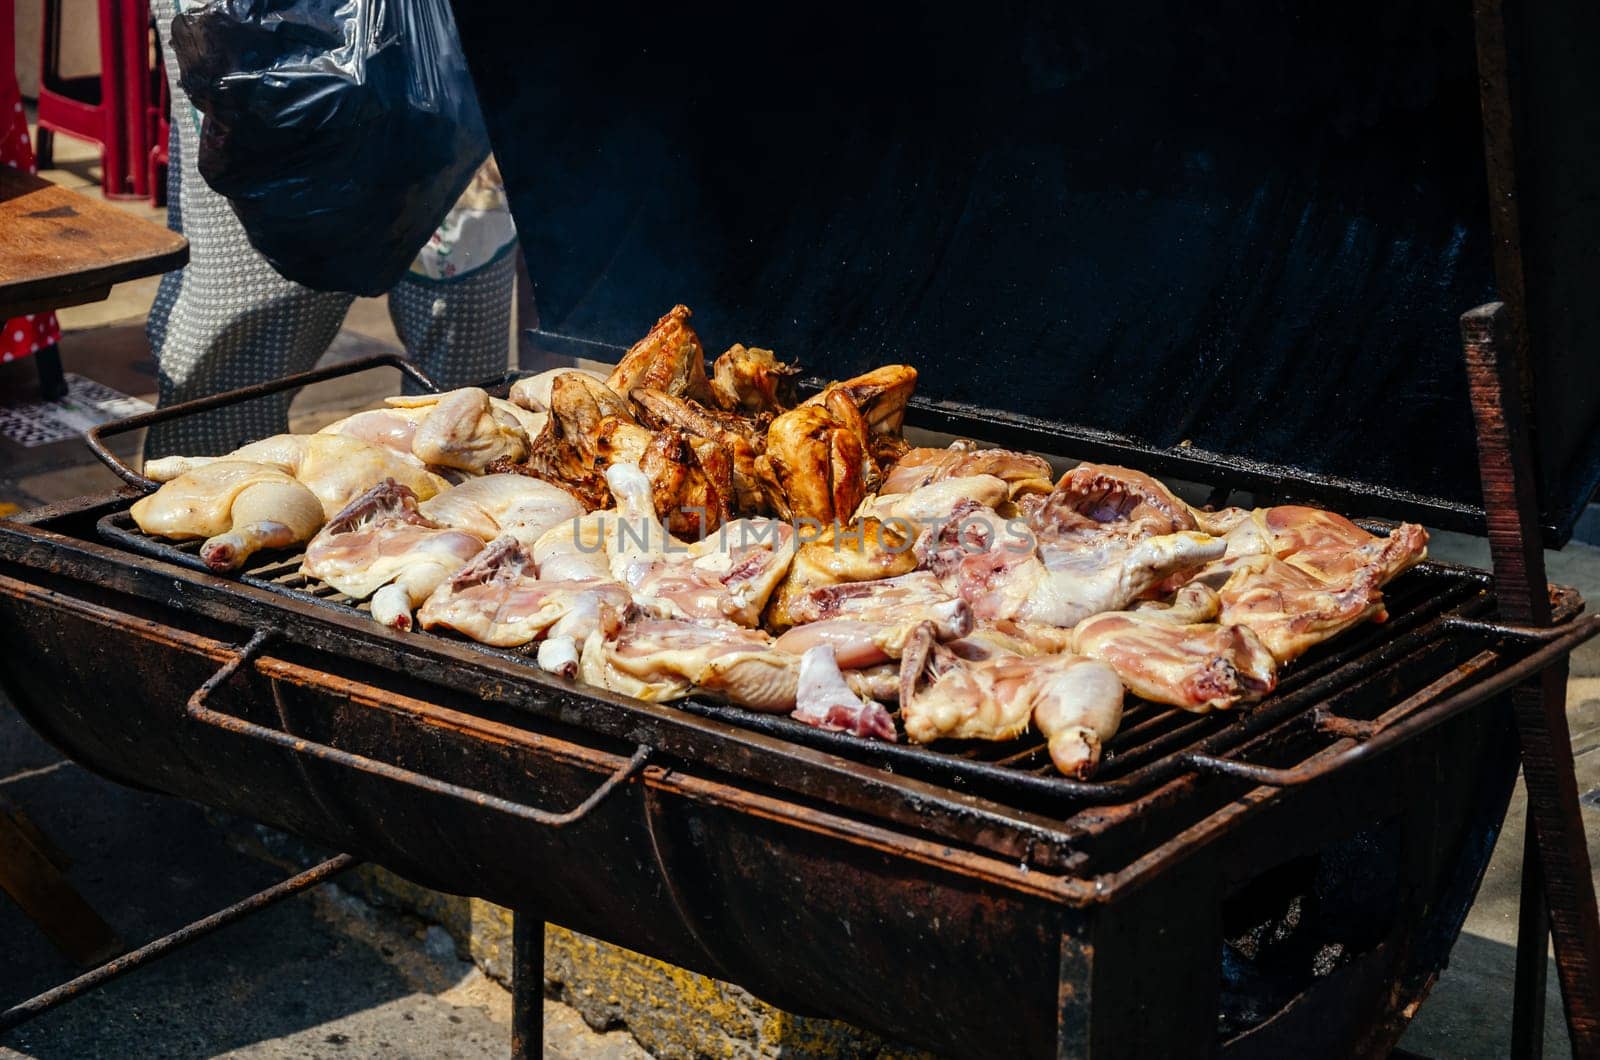 Chicken wing being grilled on a charcoal stove with smoke. Street food. by Peruphotoart